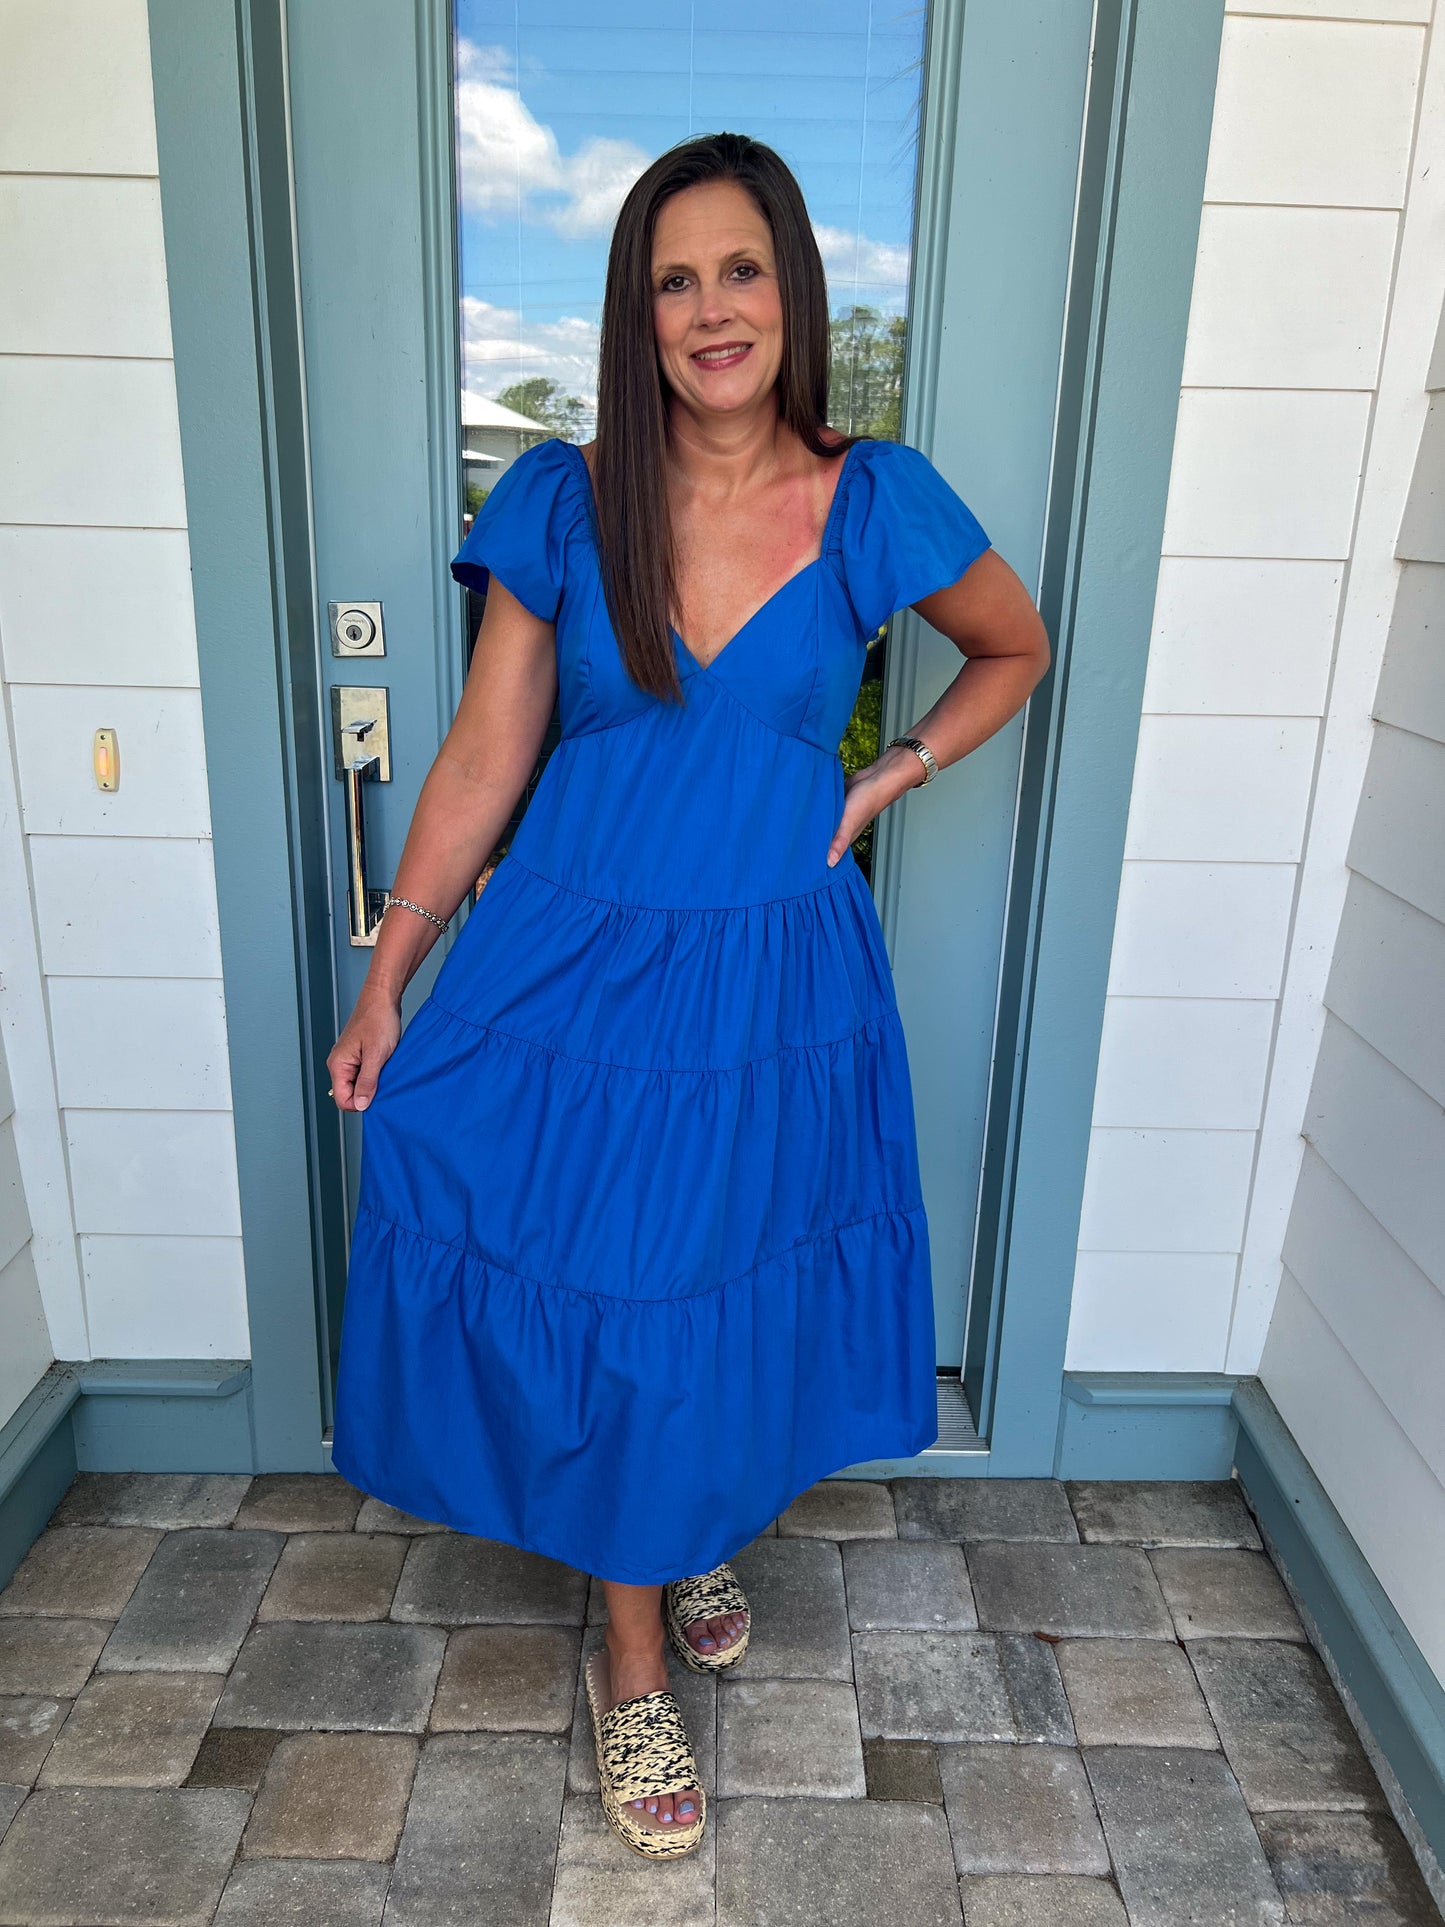 The Bahama Blue Dress by Lucy Paris